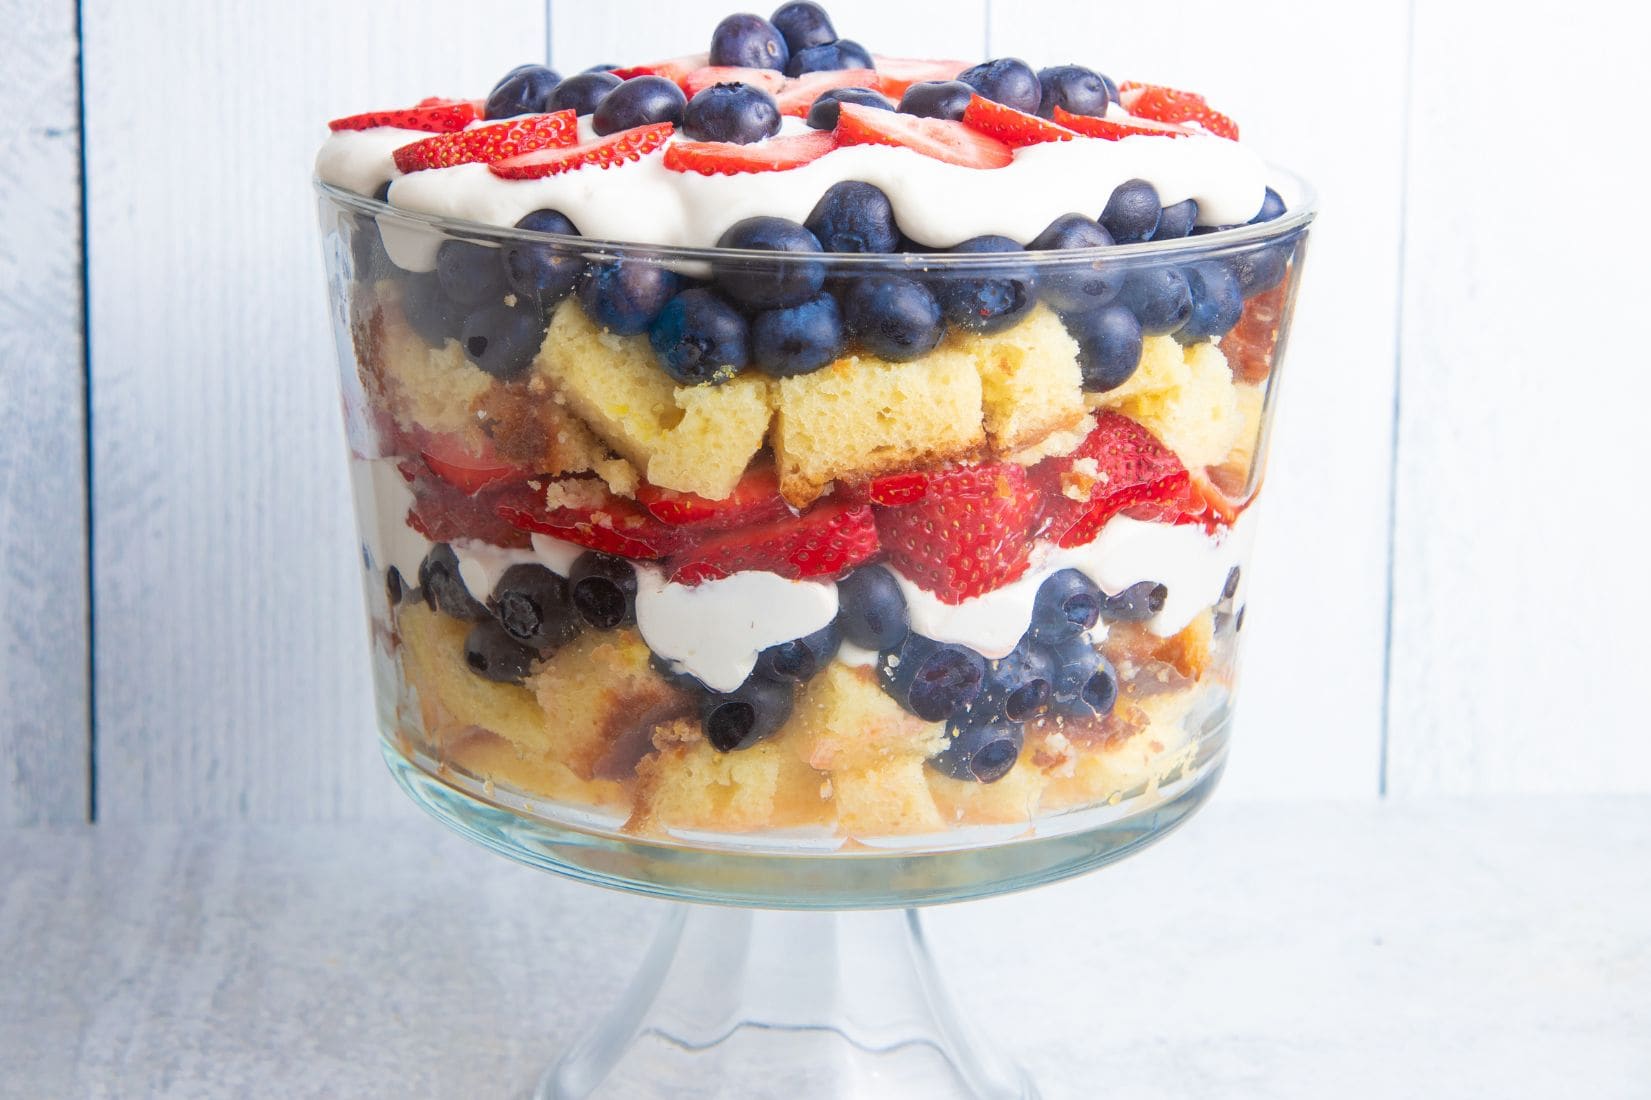 Closer view of a festive berry trifle in a trifle dish on a light background.